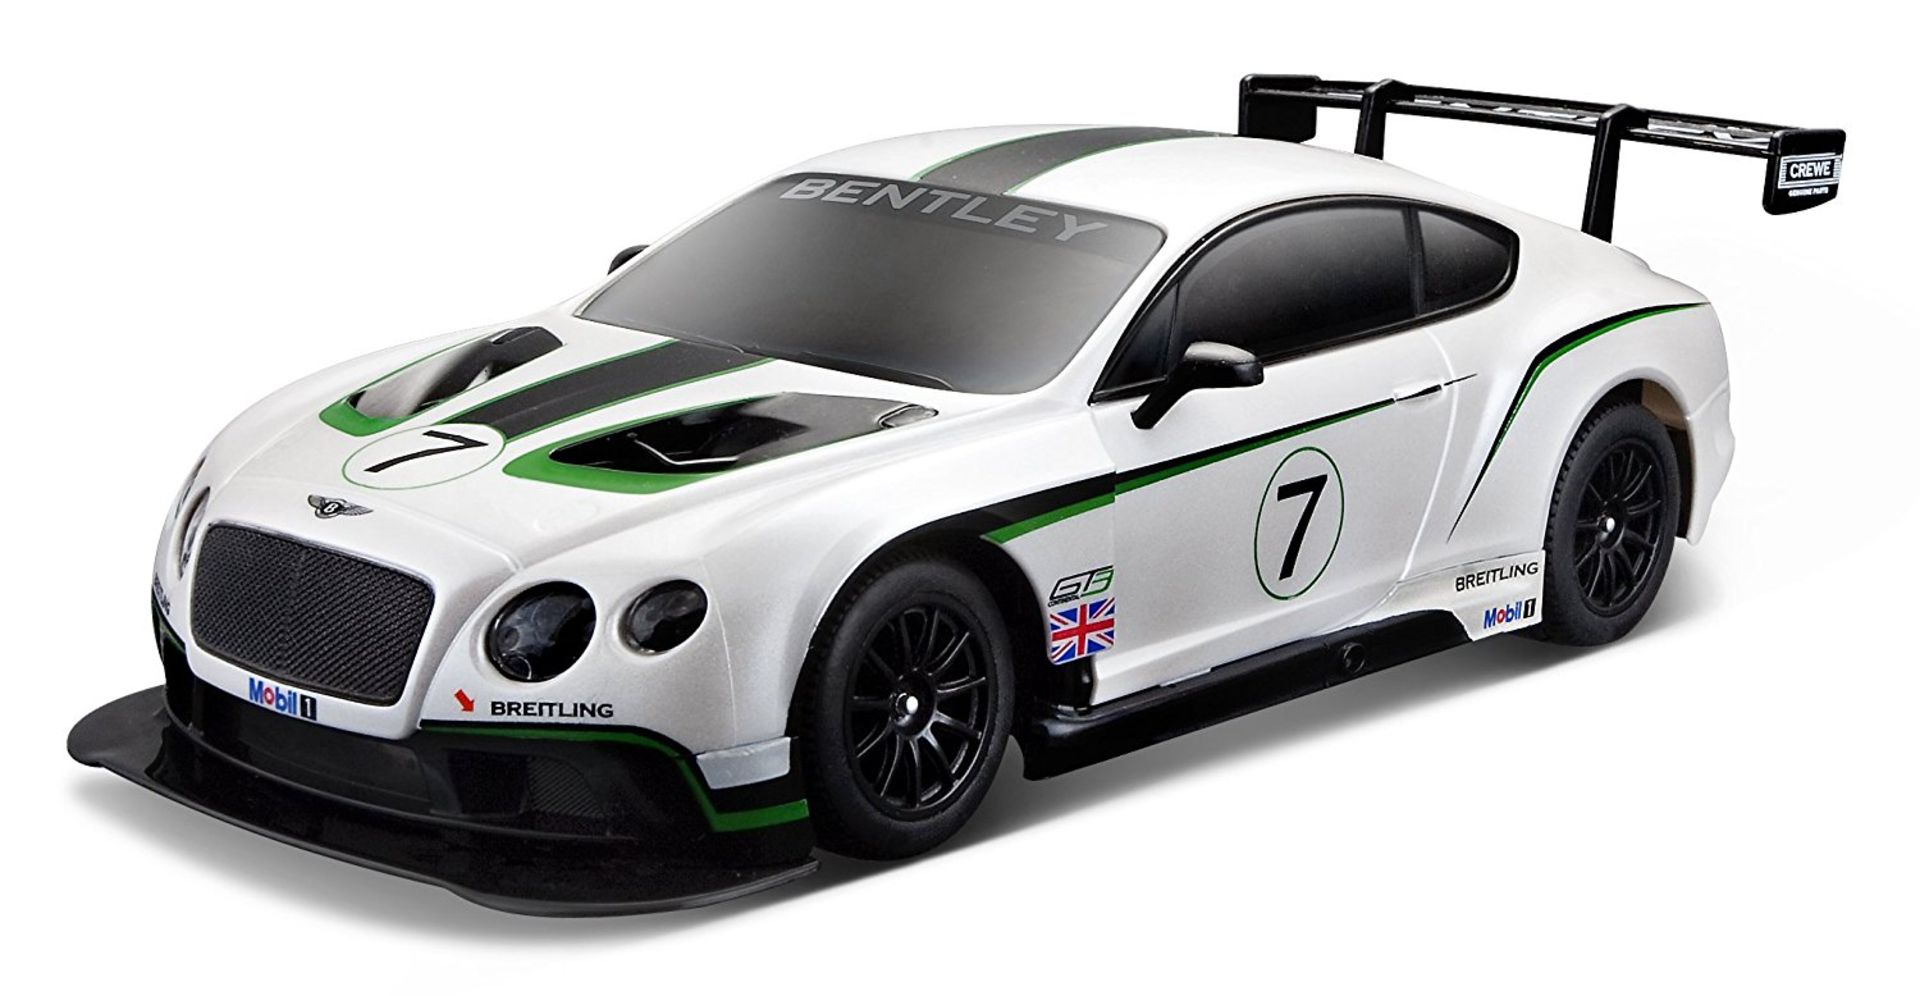 V *TRADE QTY* Brand New R/C 1:14 Scale Bentley Continental GT3 - Amazon price £36.99 - Colours May